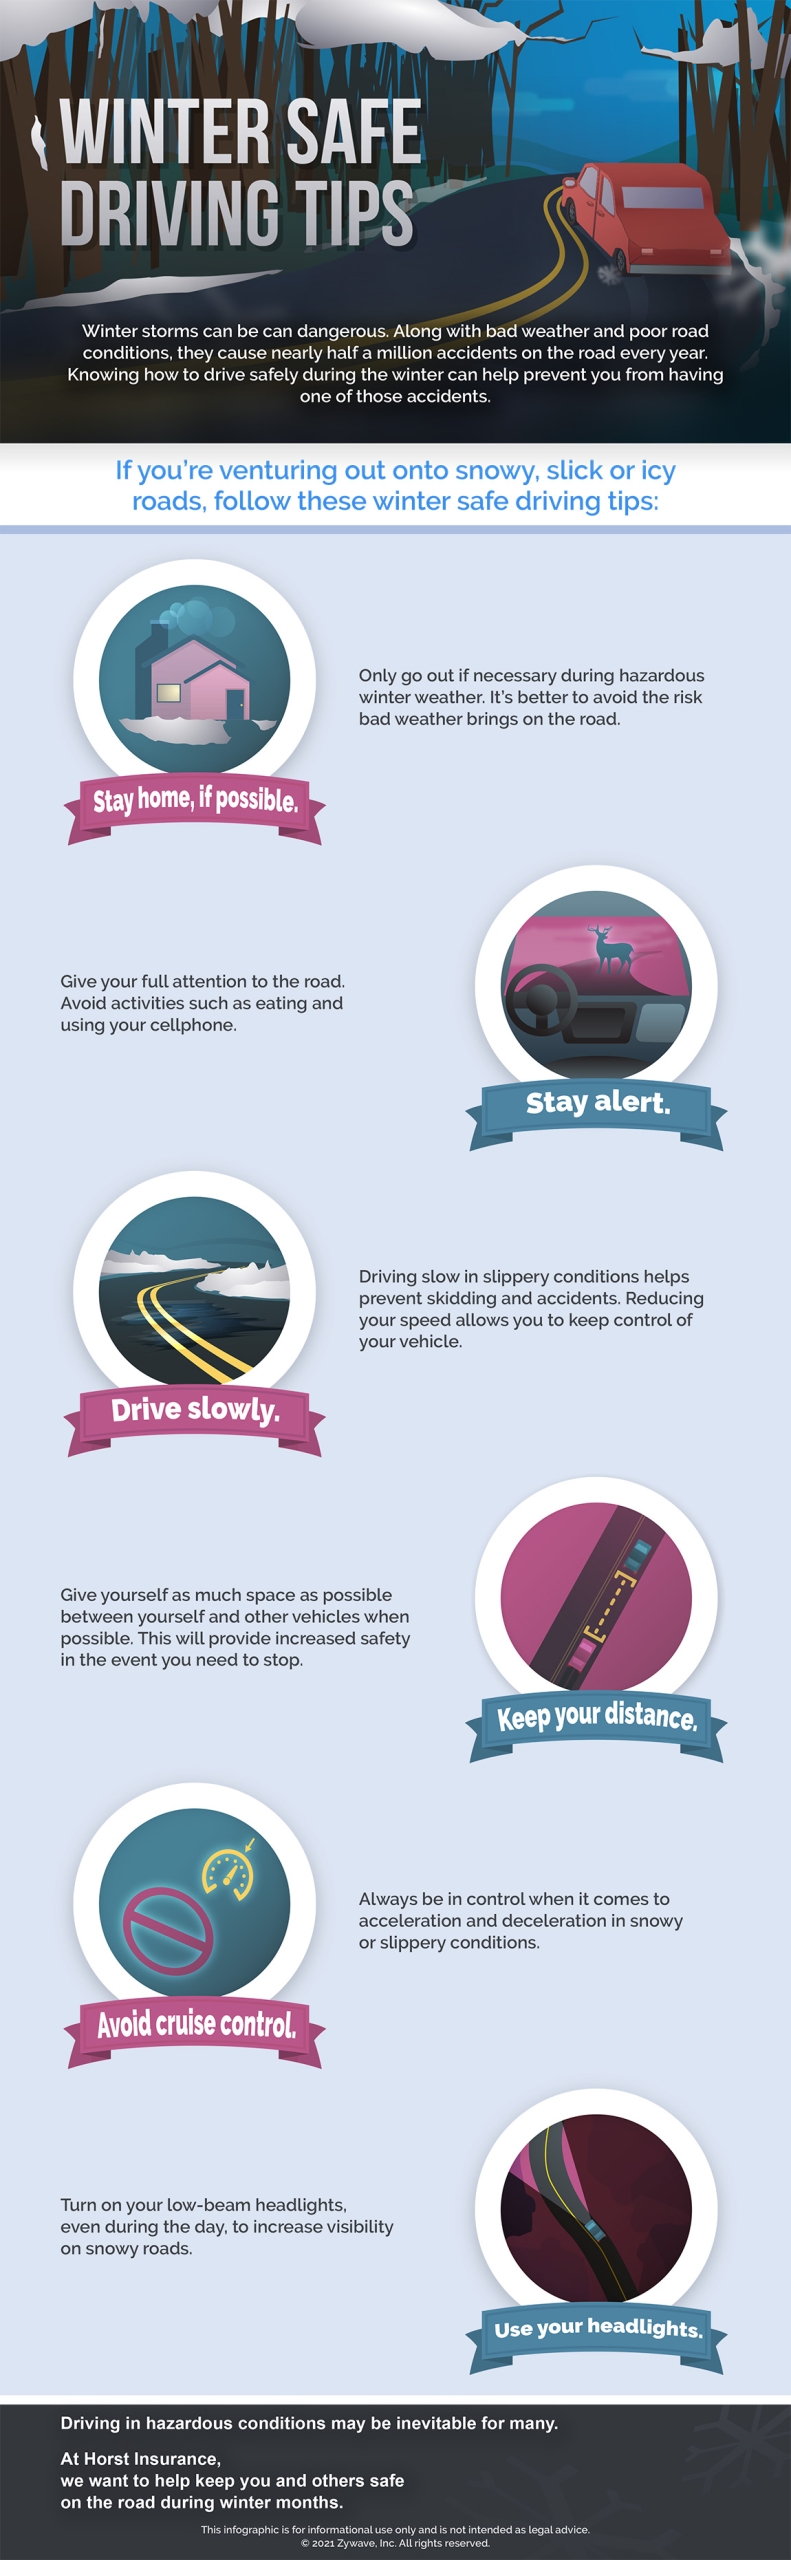 Winter safe driving tips infographic